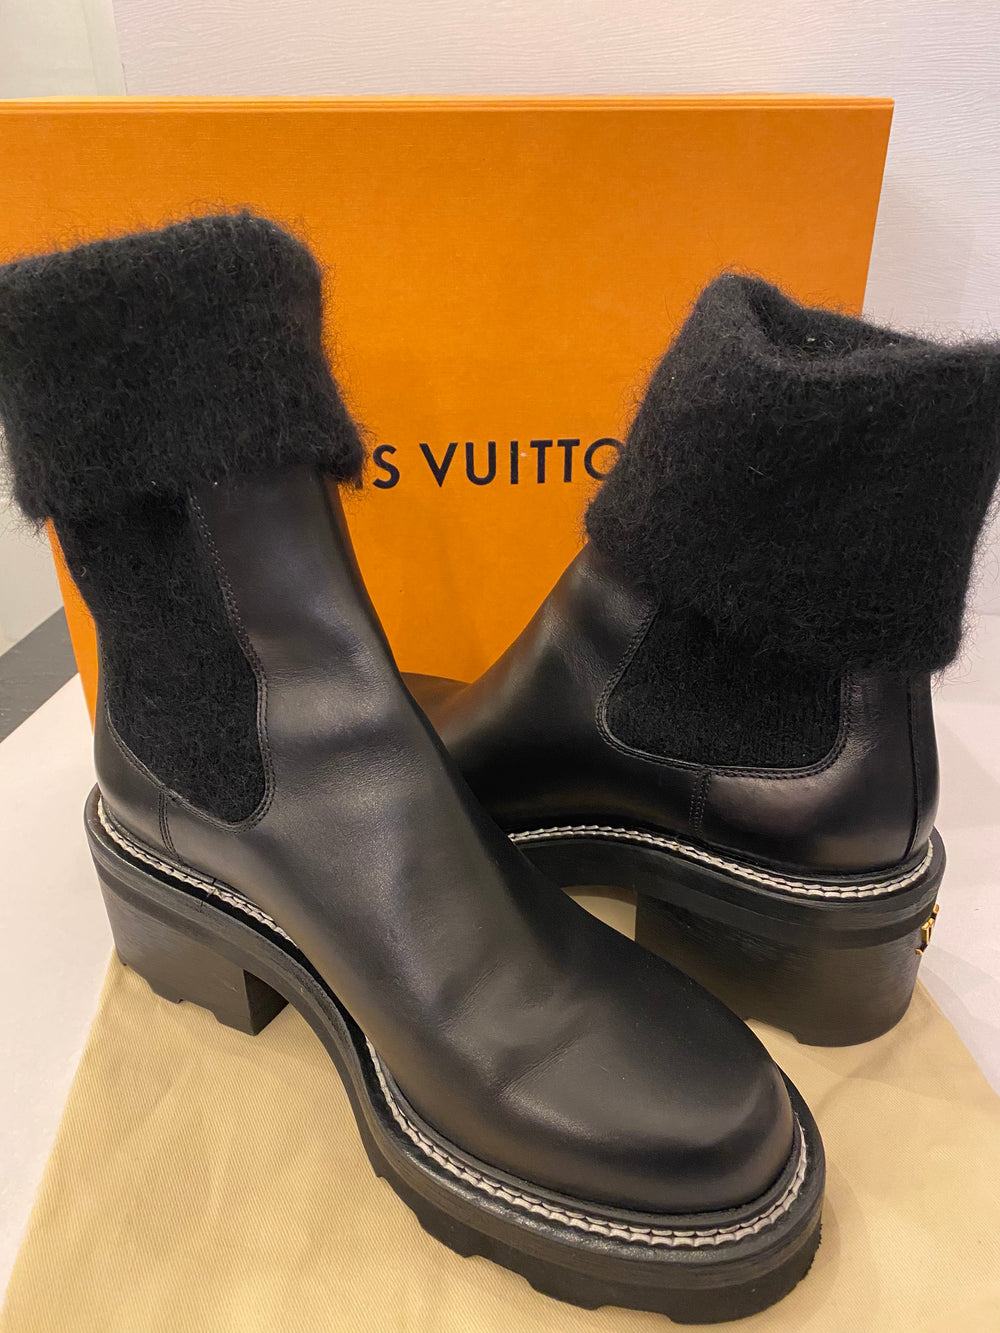 Louis Vuitton Beaubourg Ankle Boots uk6 (New)